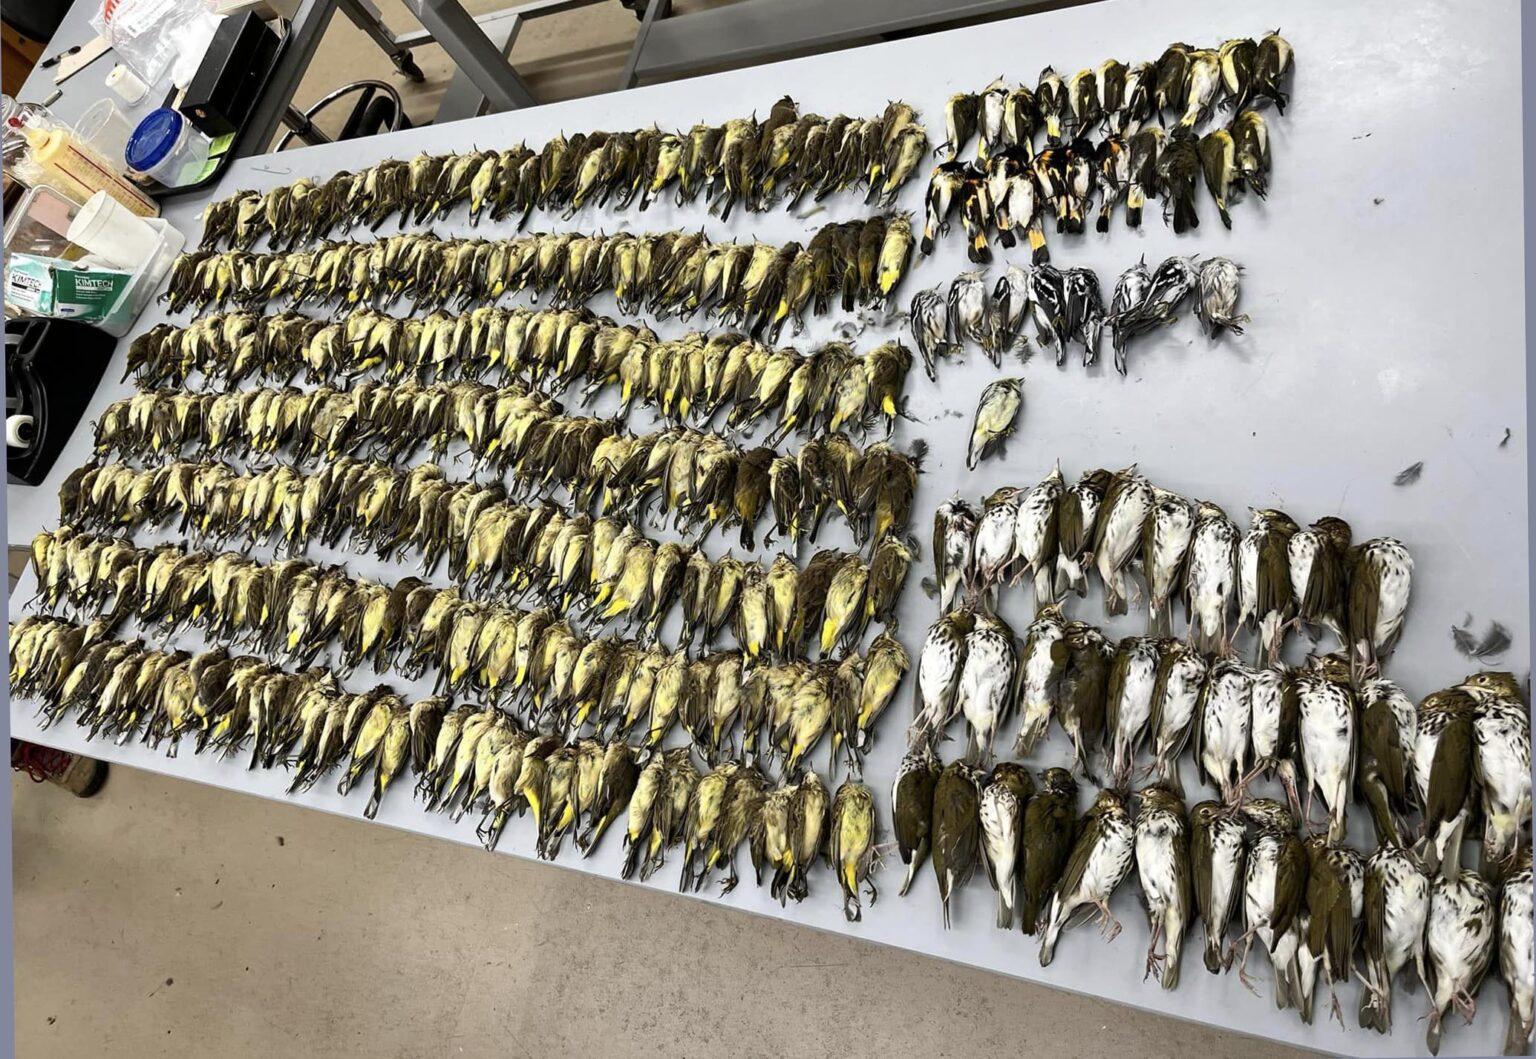 Field Museum staff collected 1,000 dead birds Thursday from the grounds of McCormick Place. (Courtesy of Taylor Hains)